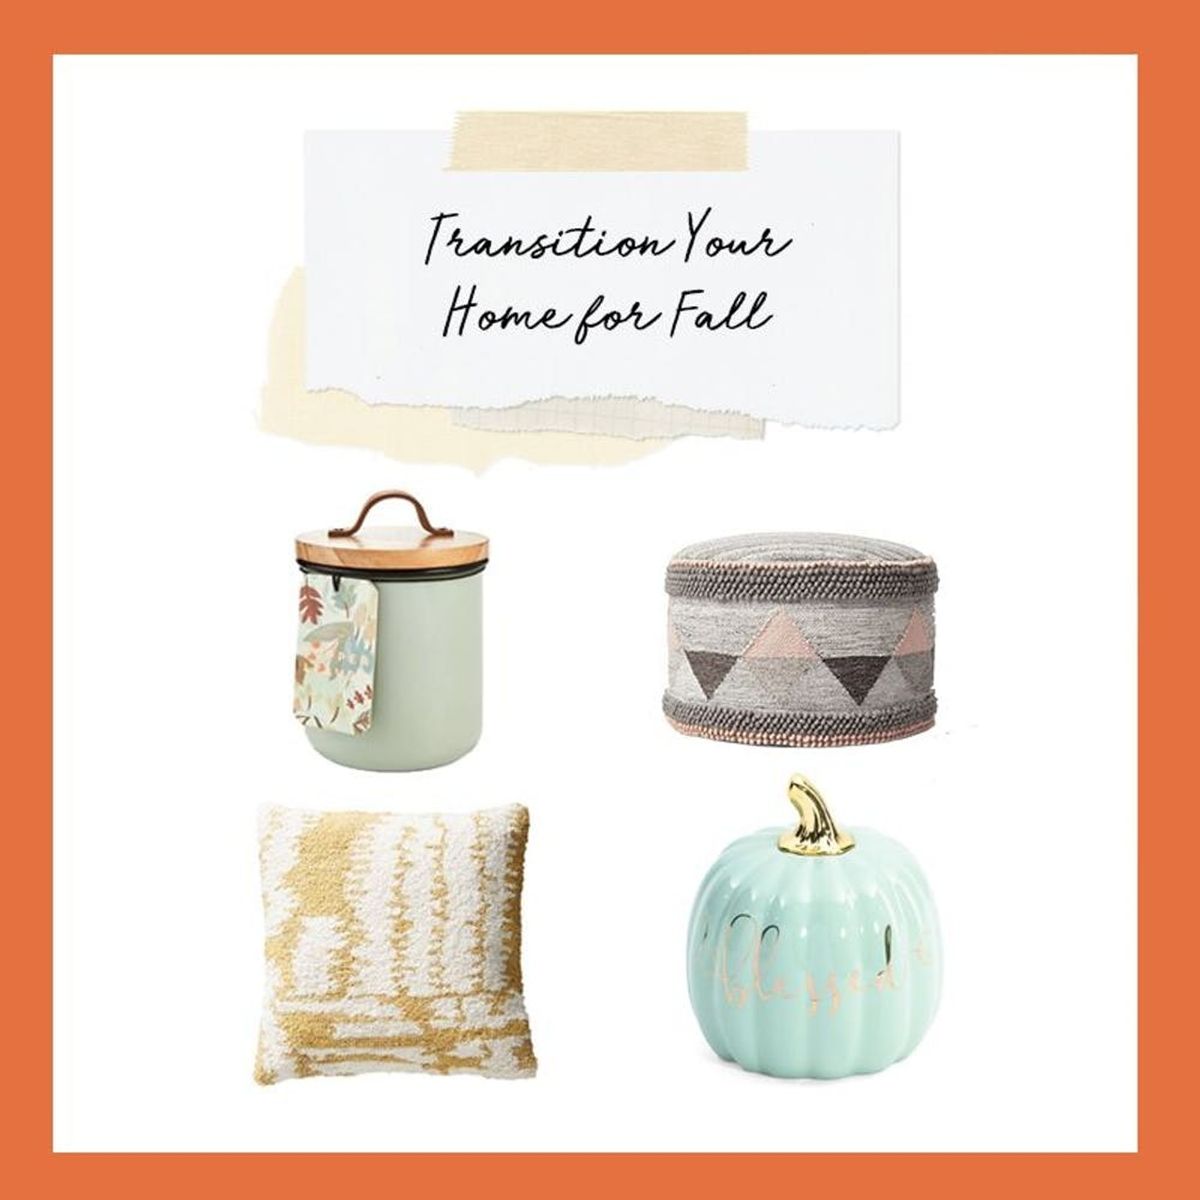 3 Stylish Ways to Transition Your Home for Fall